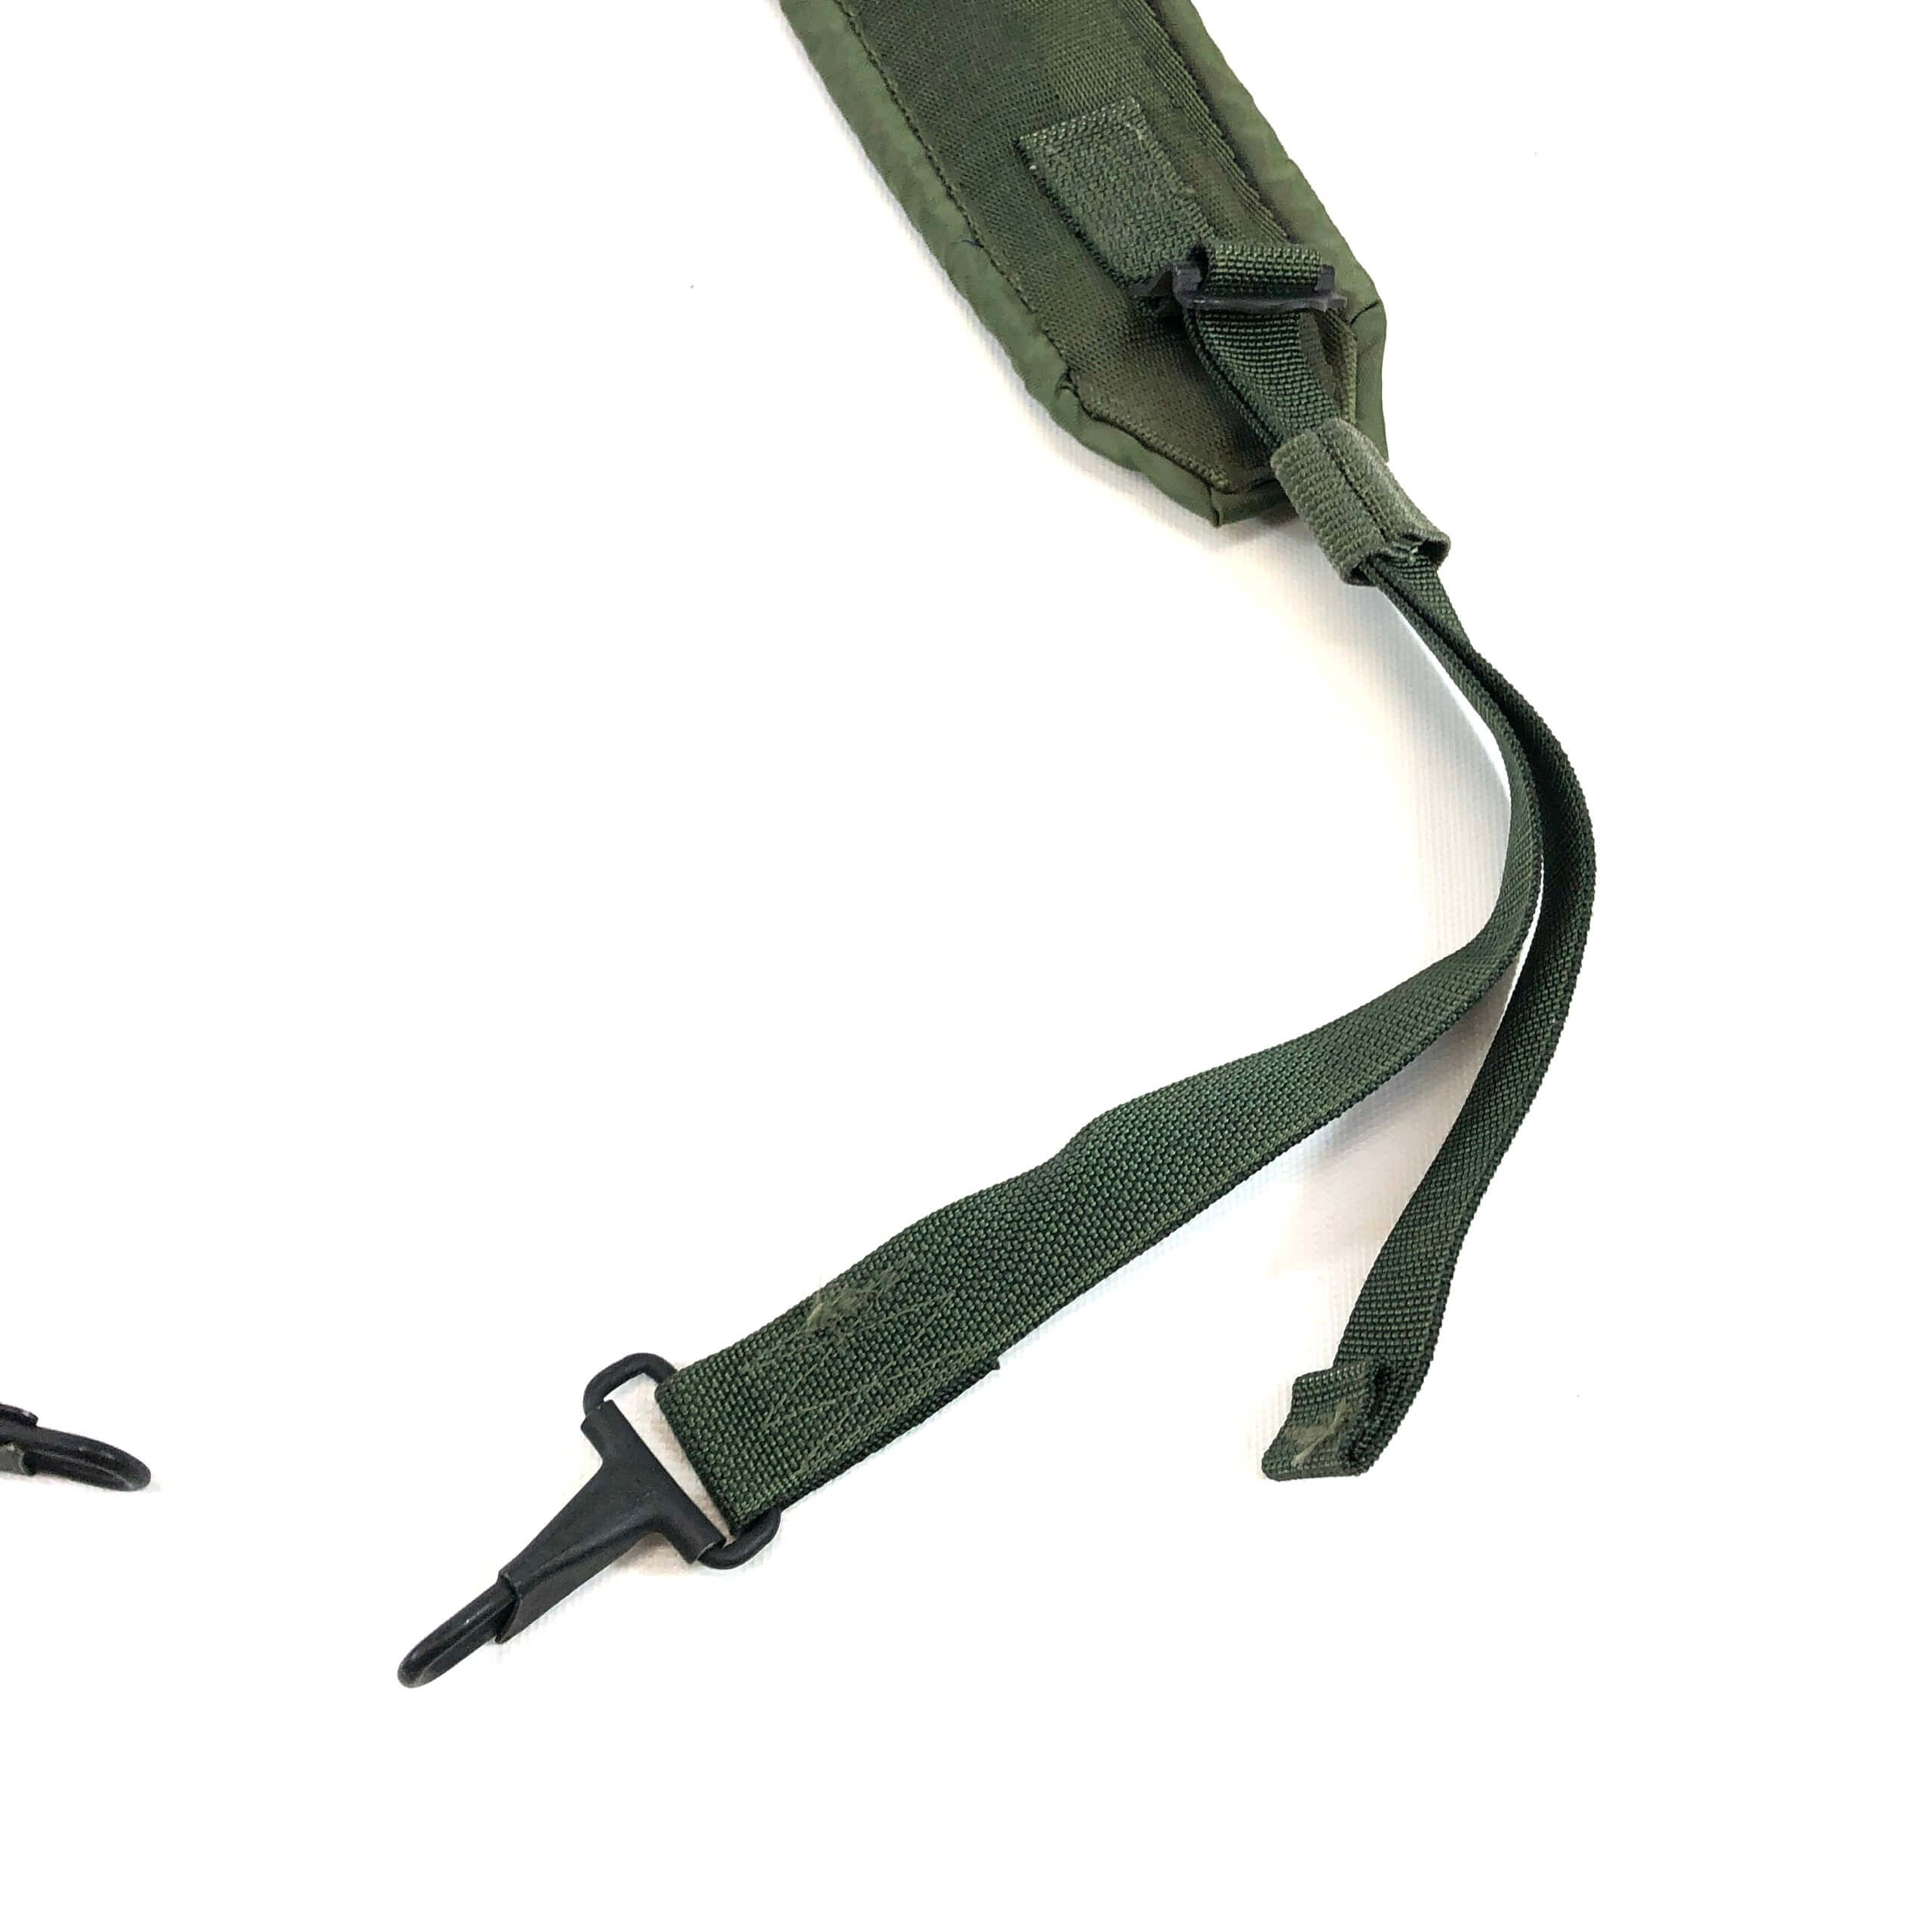 EXC GENUINE US Military Army ALICE Y-SUSPENDERS LC-2 OD Green Load Bearing VGC 